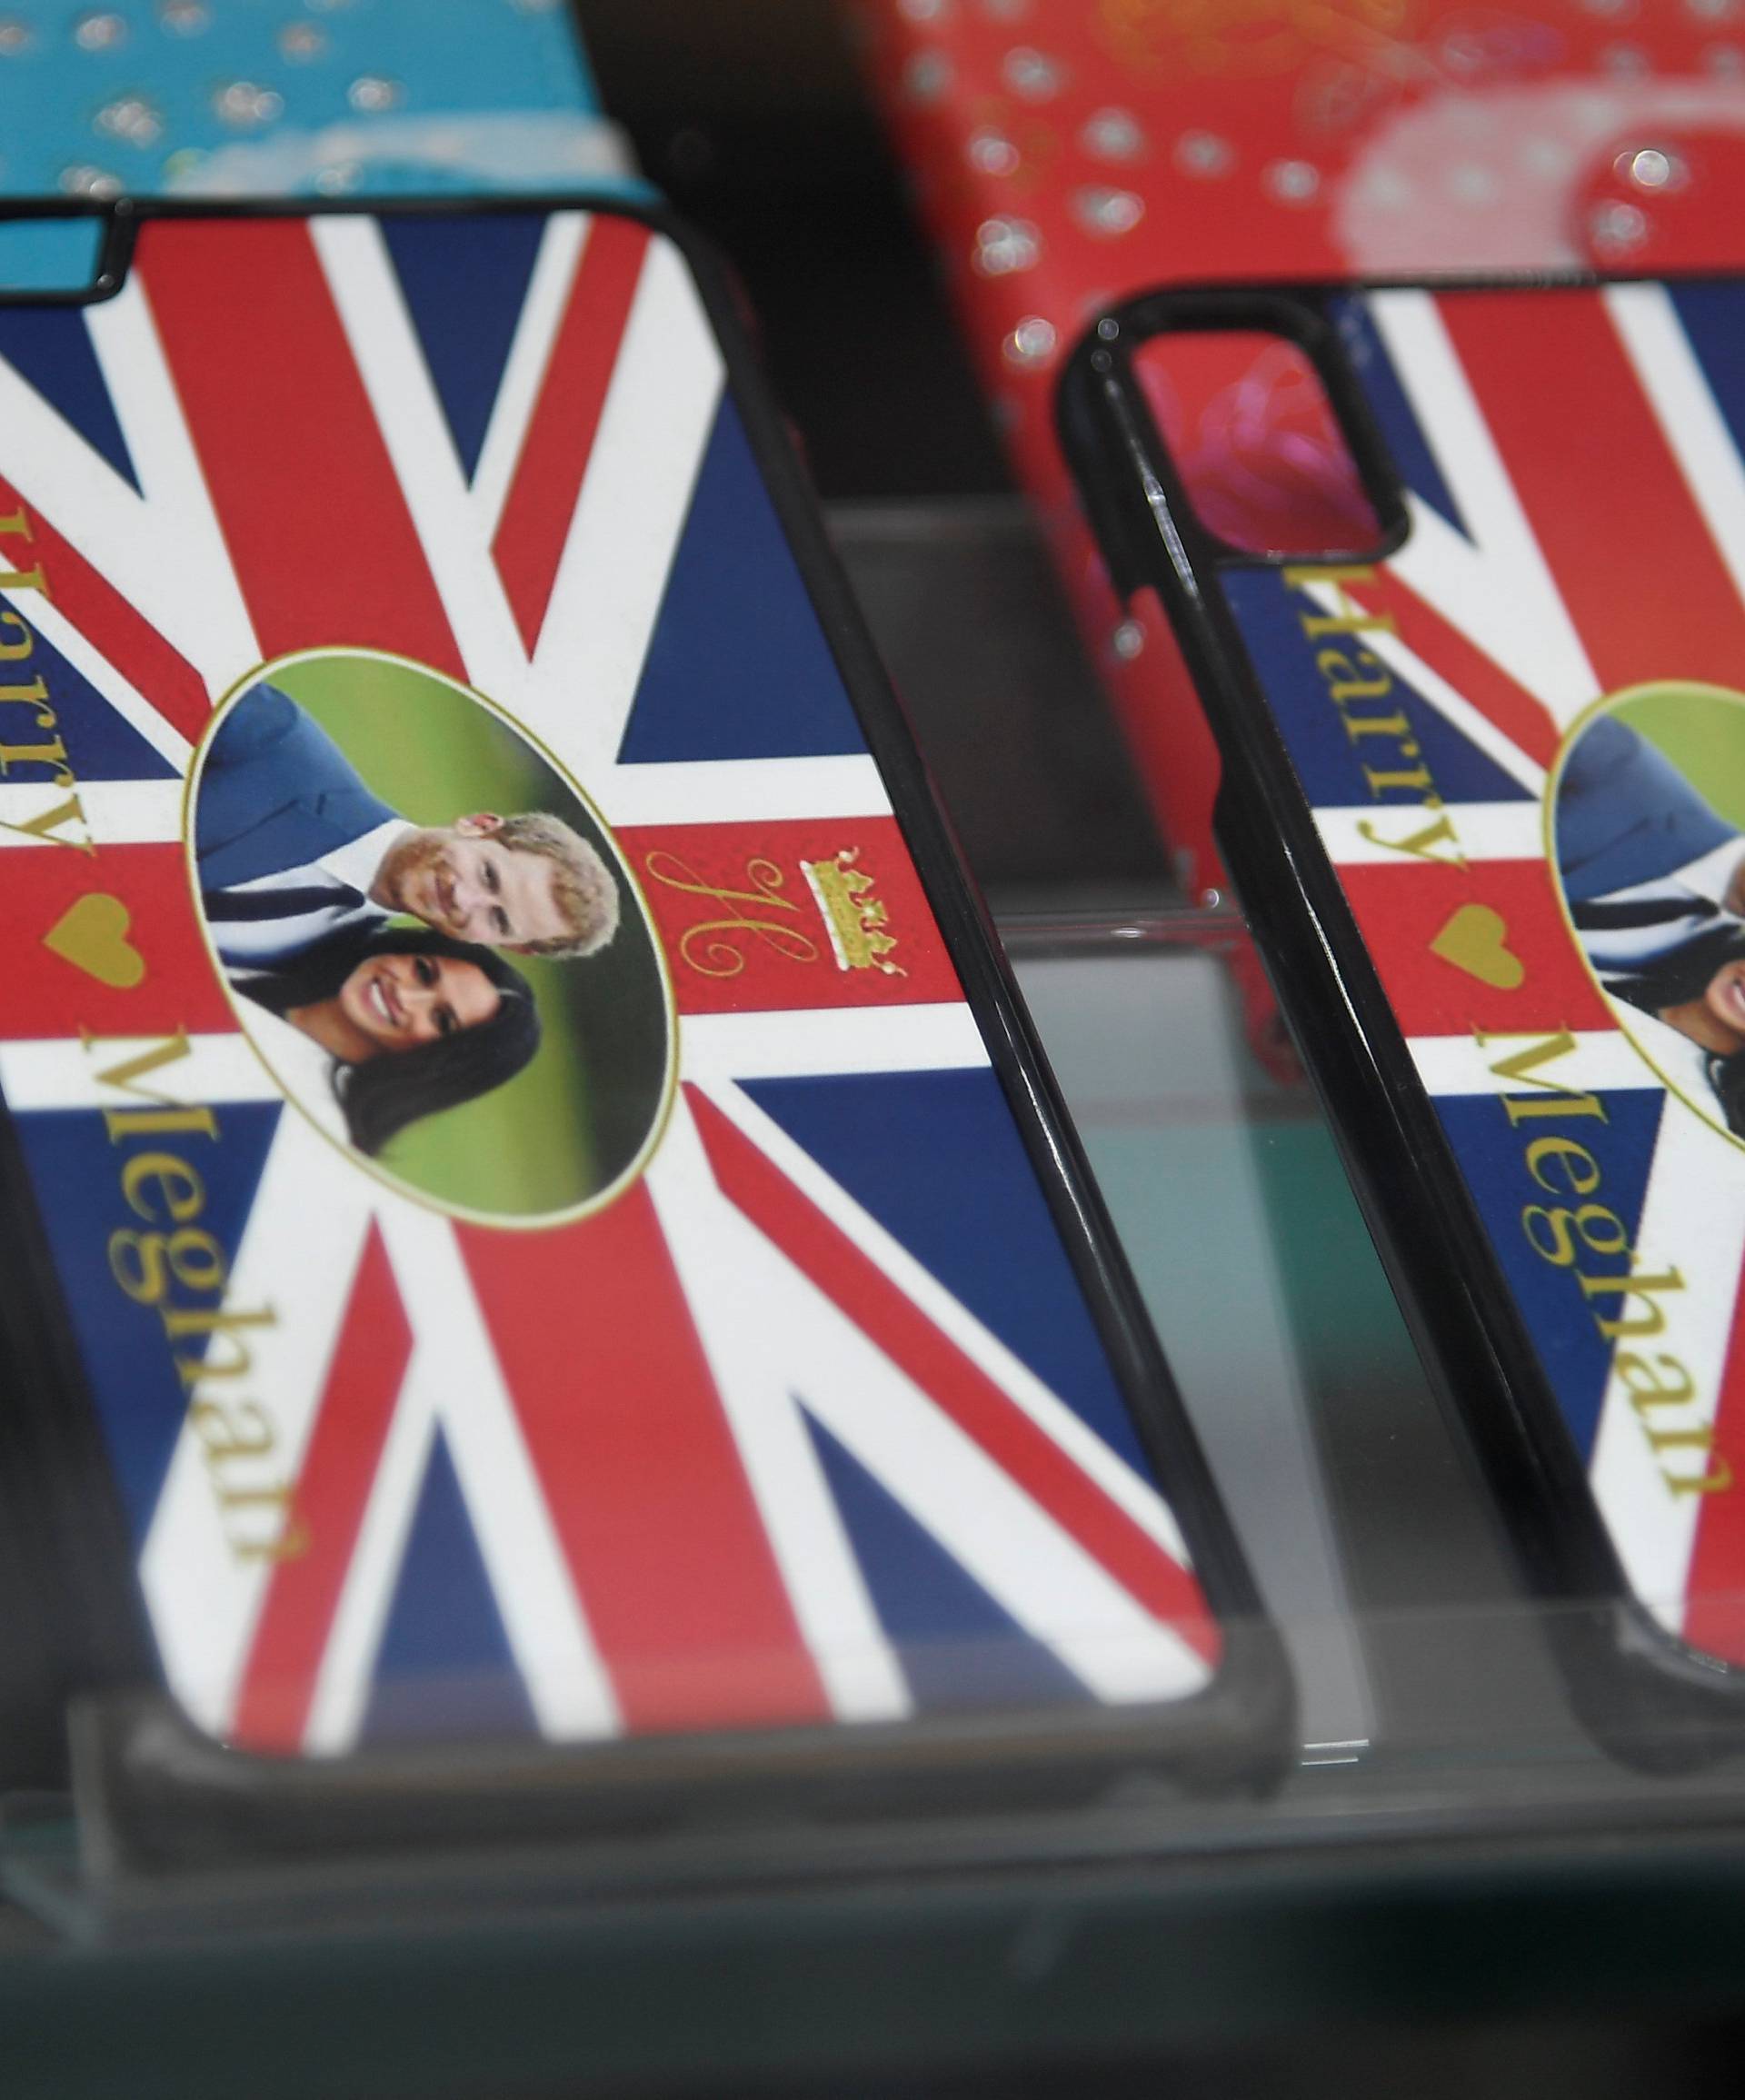 Mobile phone cases commemorating the forthcoming wedding of Britain's Prince Harry and his fiancee Meghan Markle are seen for sale in a shop in Windsor, Britain